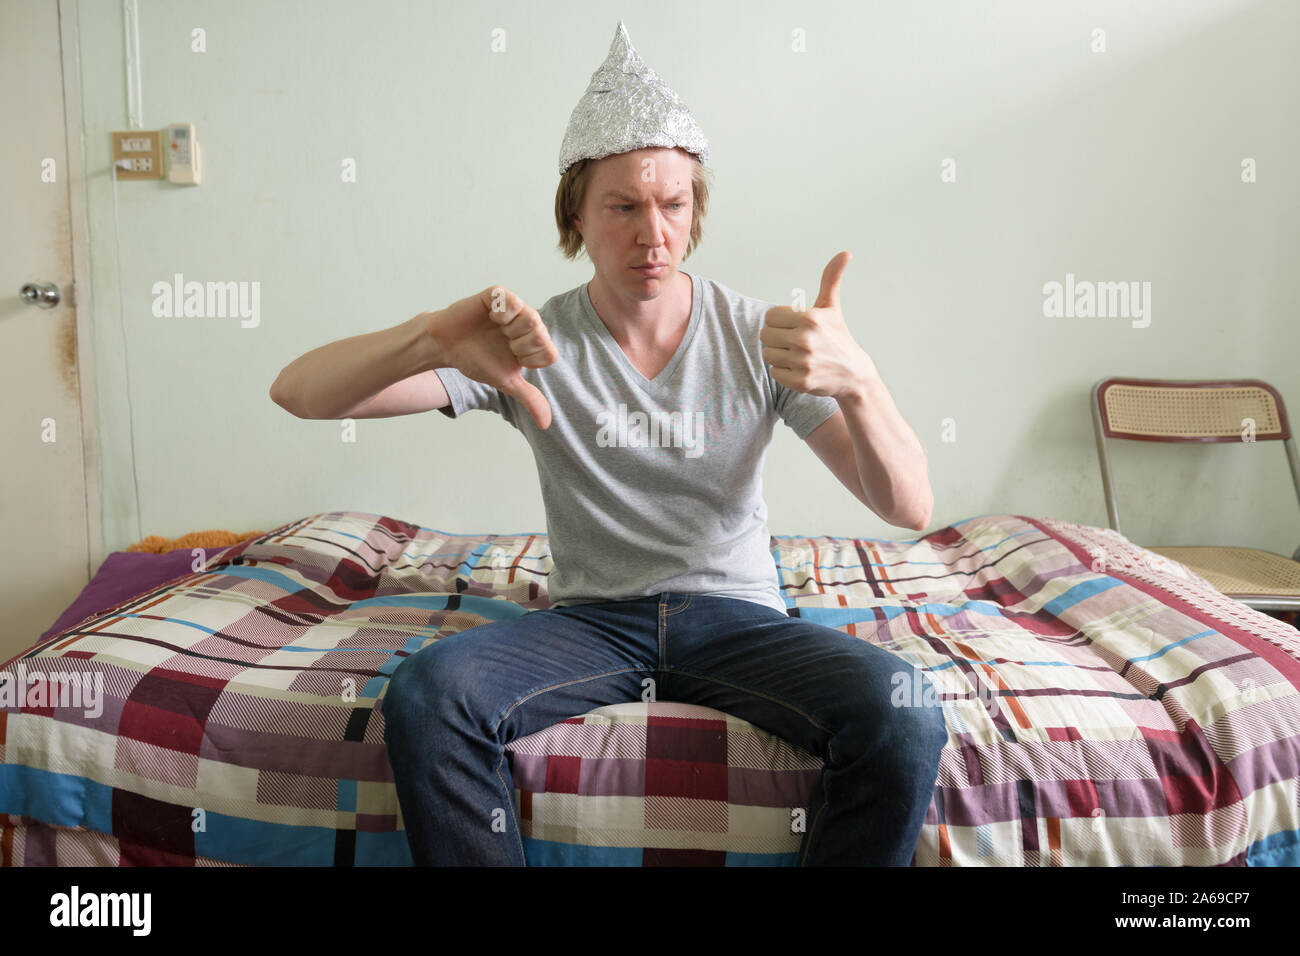 Confused young man with tin foil hat making decision in the bedroom Stock Photo